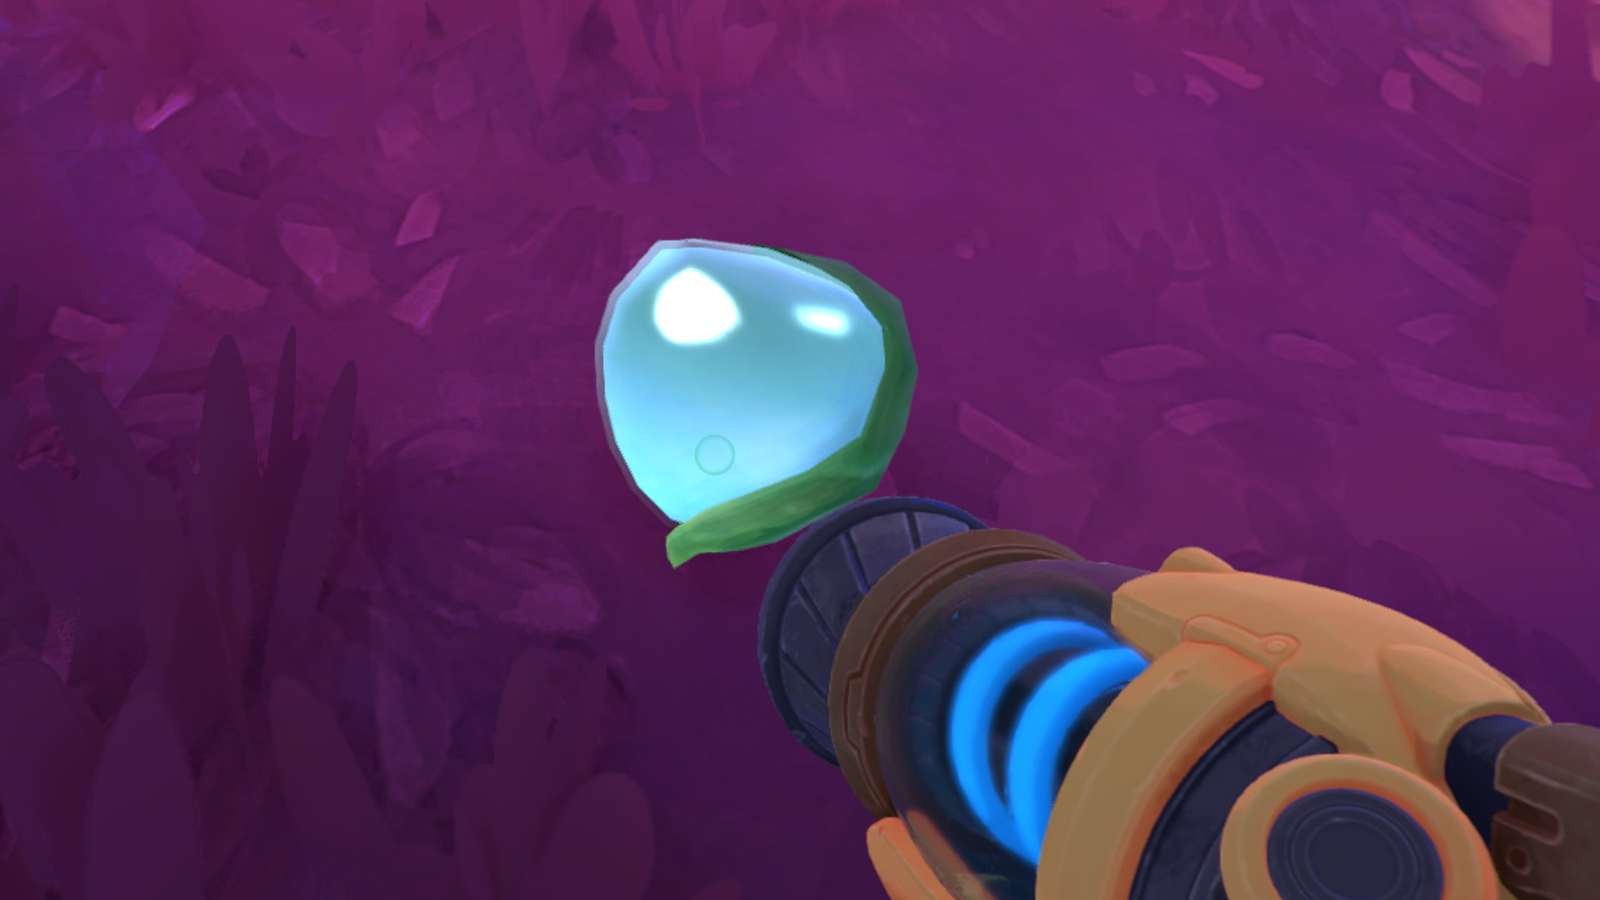 Slime Rancher 2: How To Get & Raise The Angler Slime